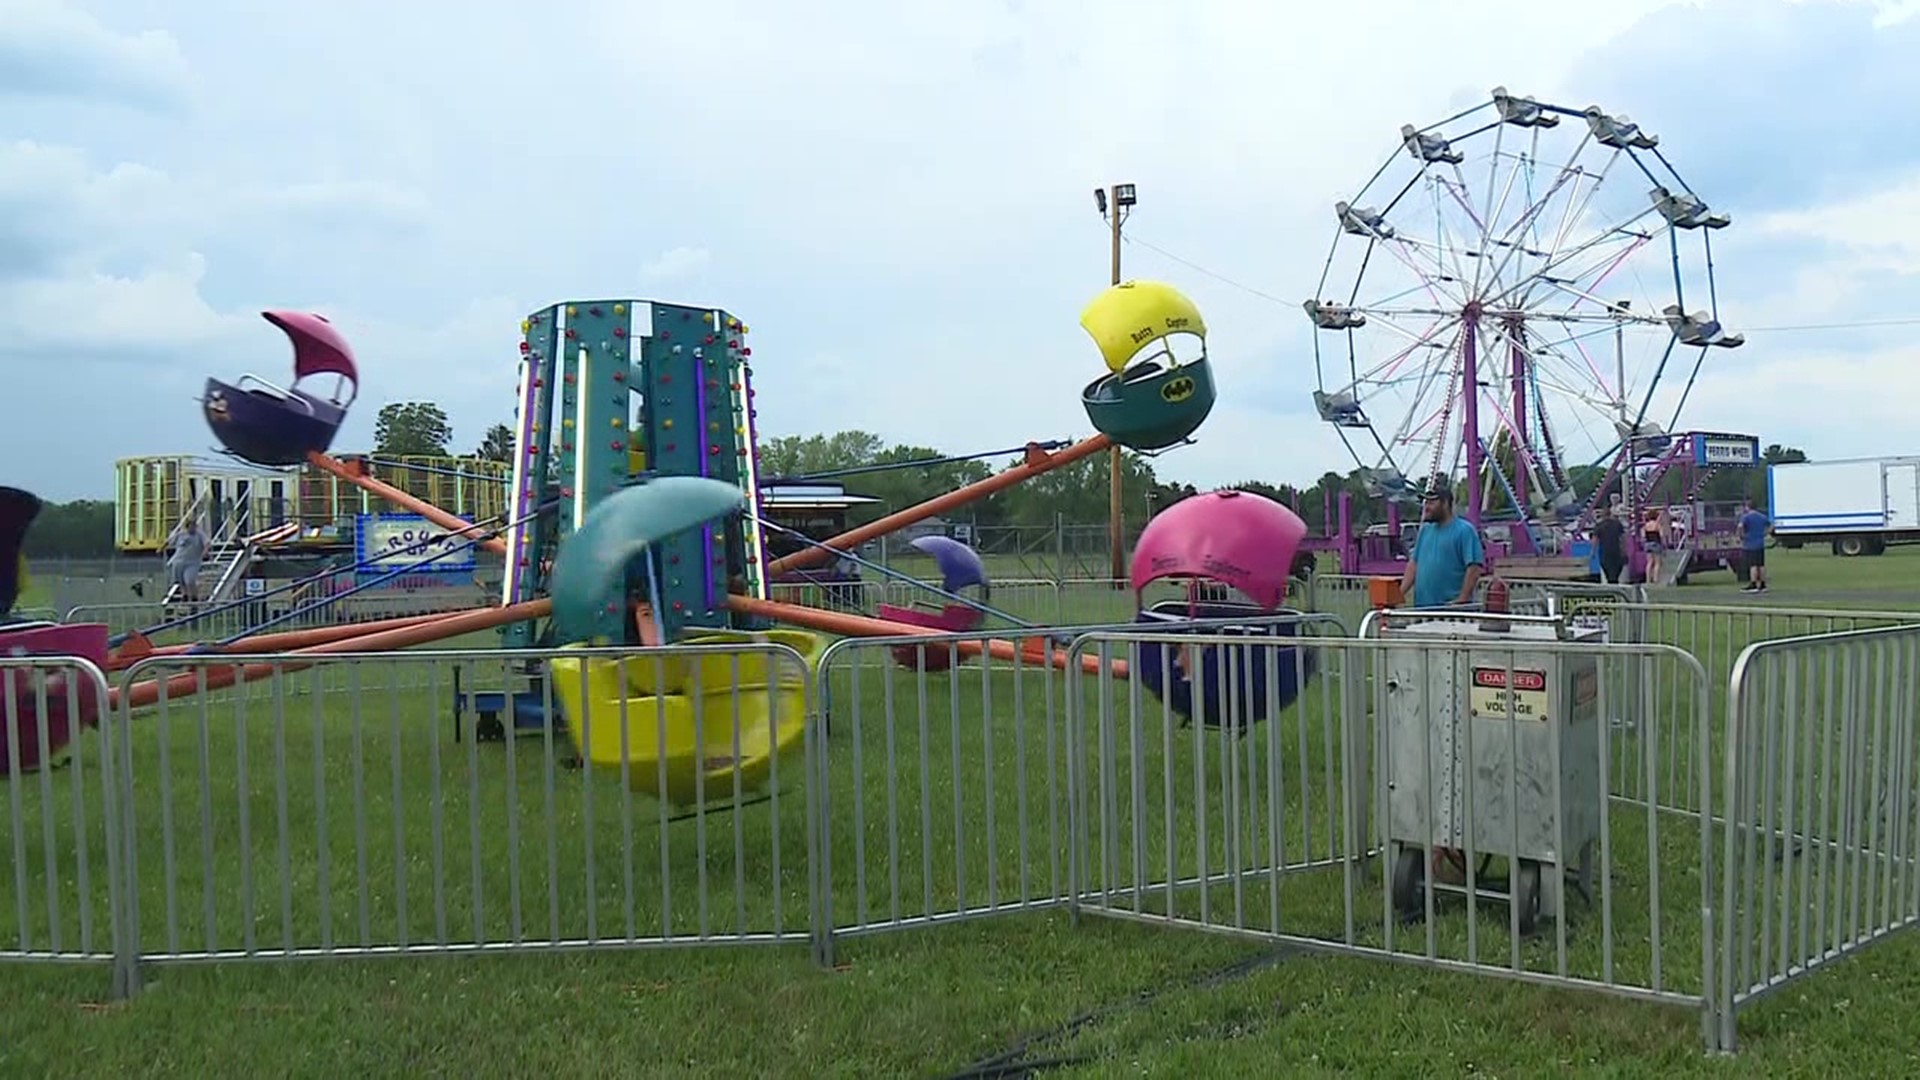 Carnival returns to help fire departments